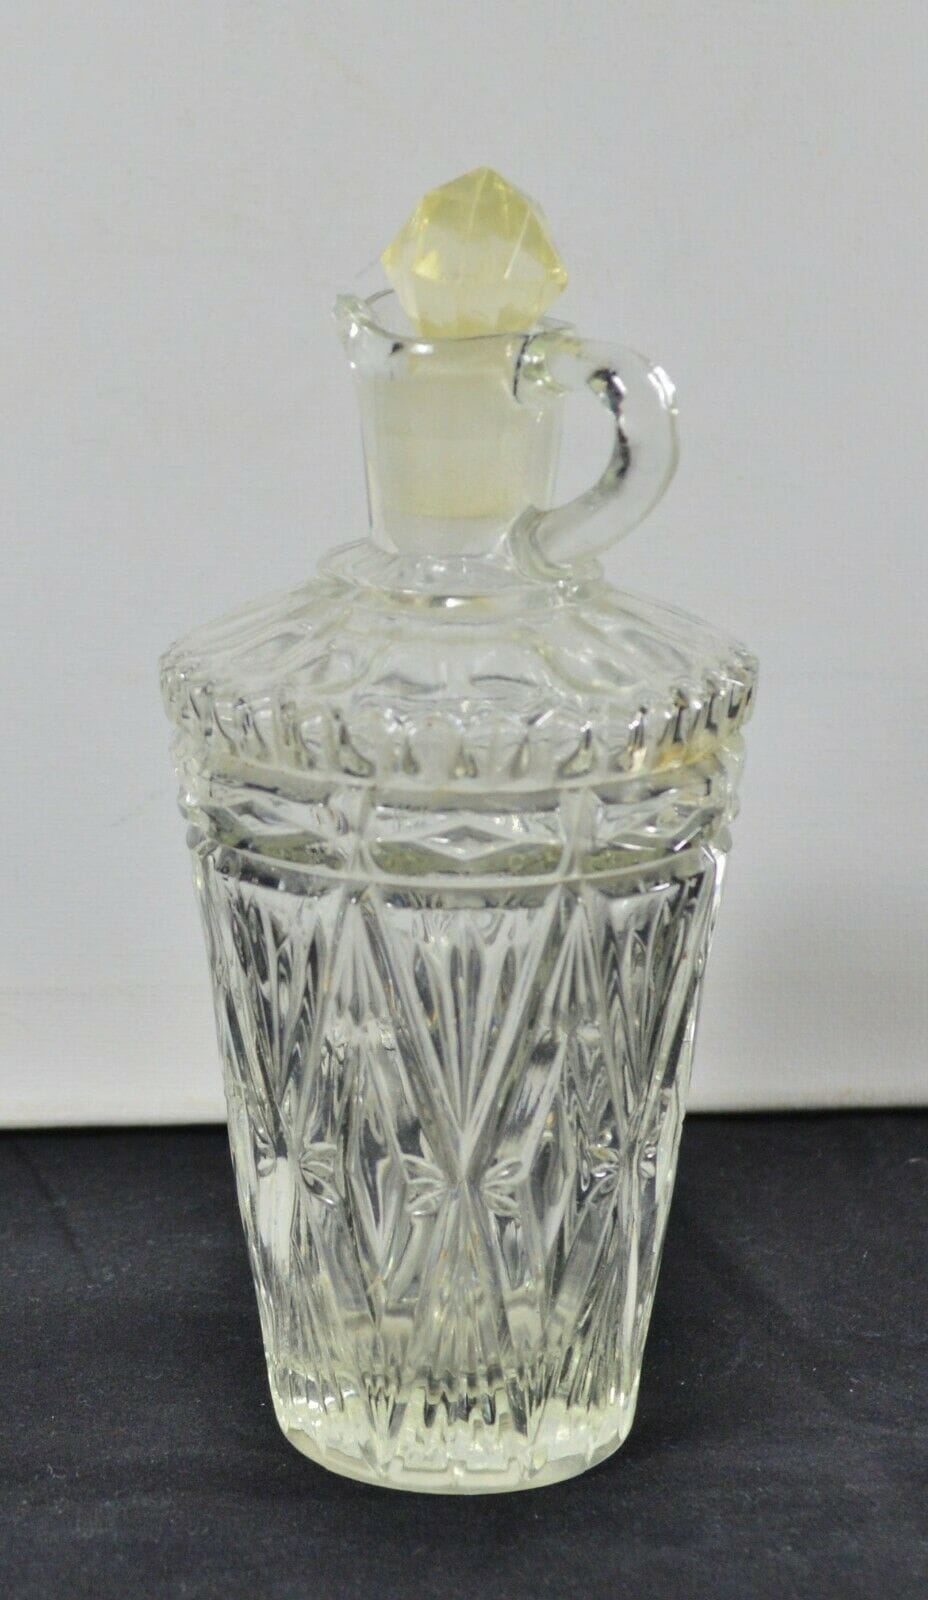 CUT GLASS VINAIGRETTE JUG w/ STOPPER(PREVIOUSLY OWNED) GOOD CONDITION - TMD167207